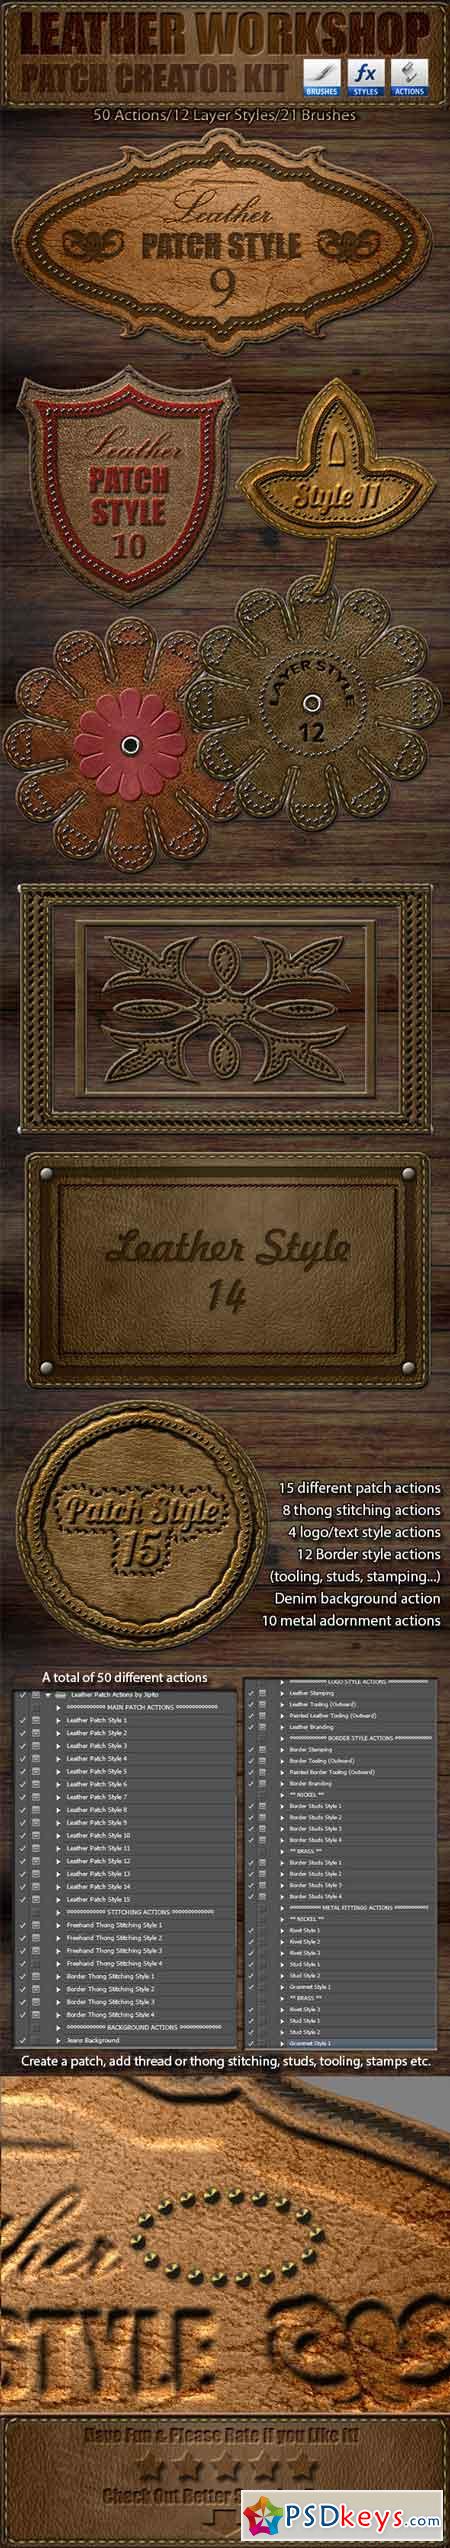 Leather Workshop Patch Creator Kit 11650790